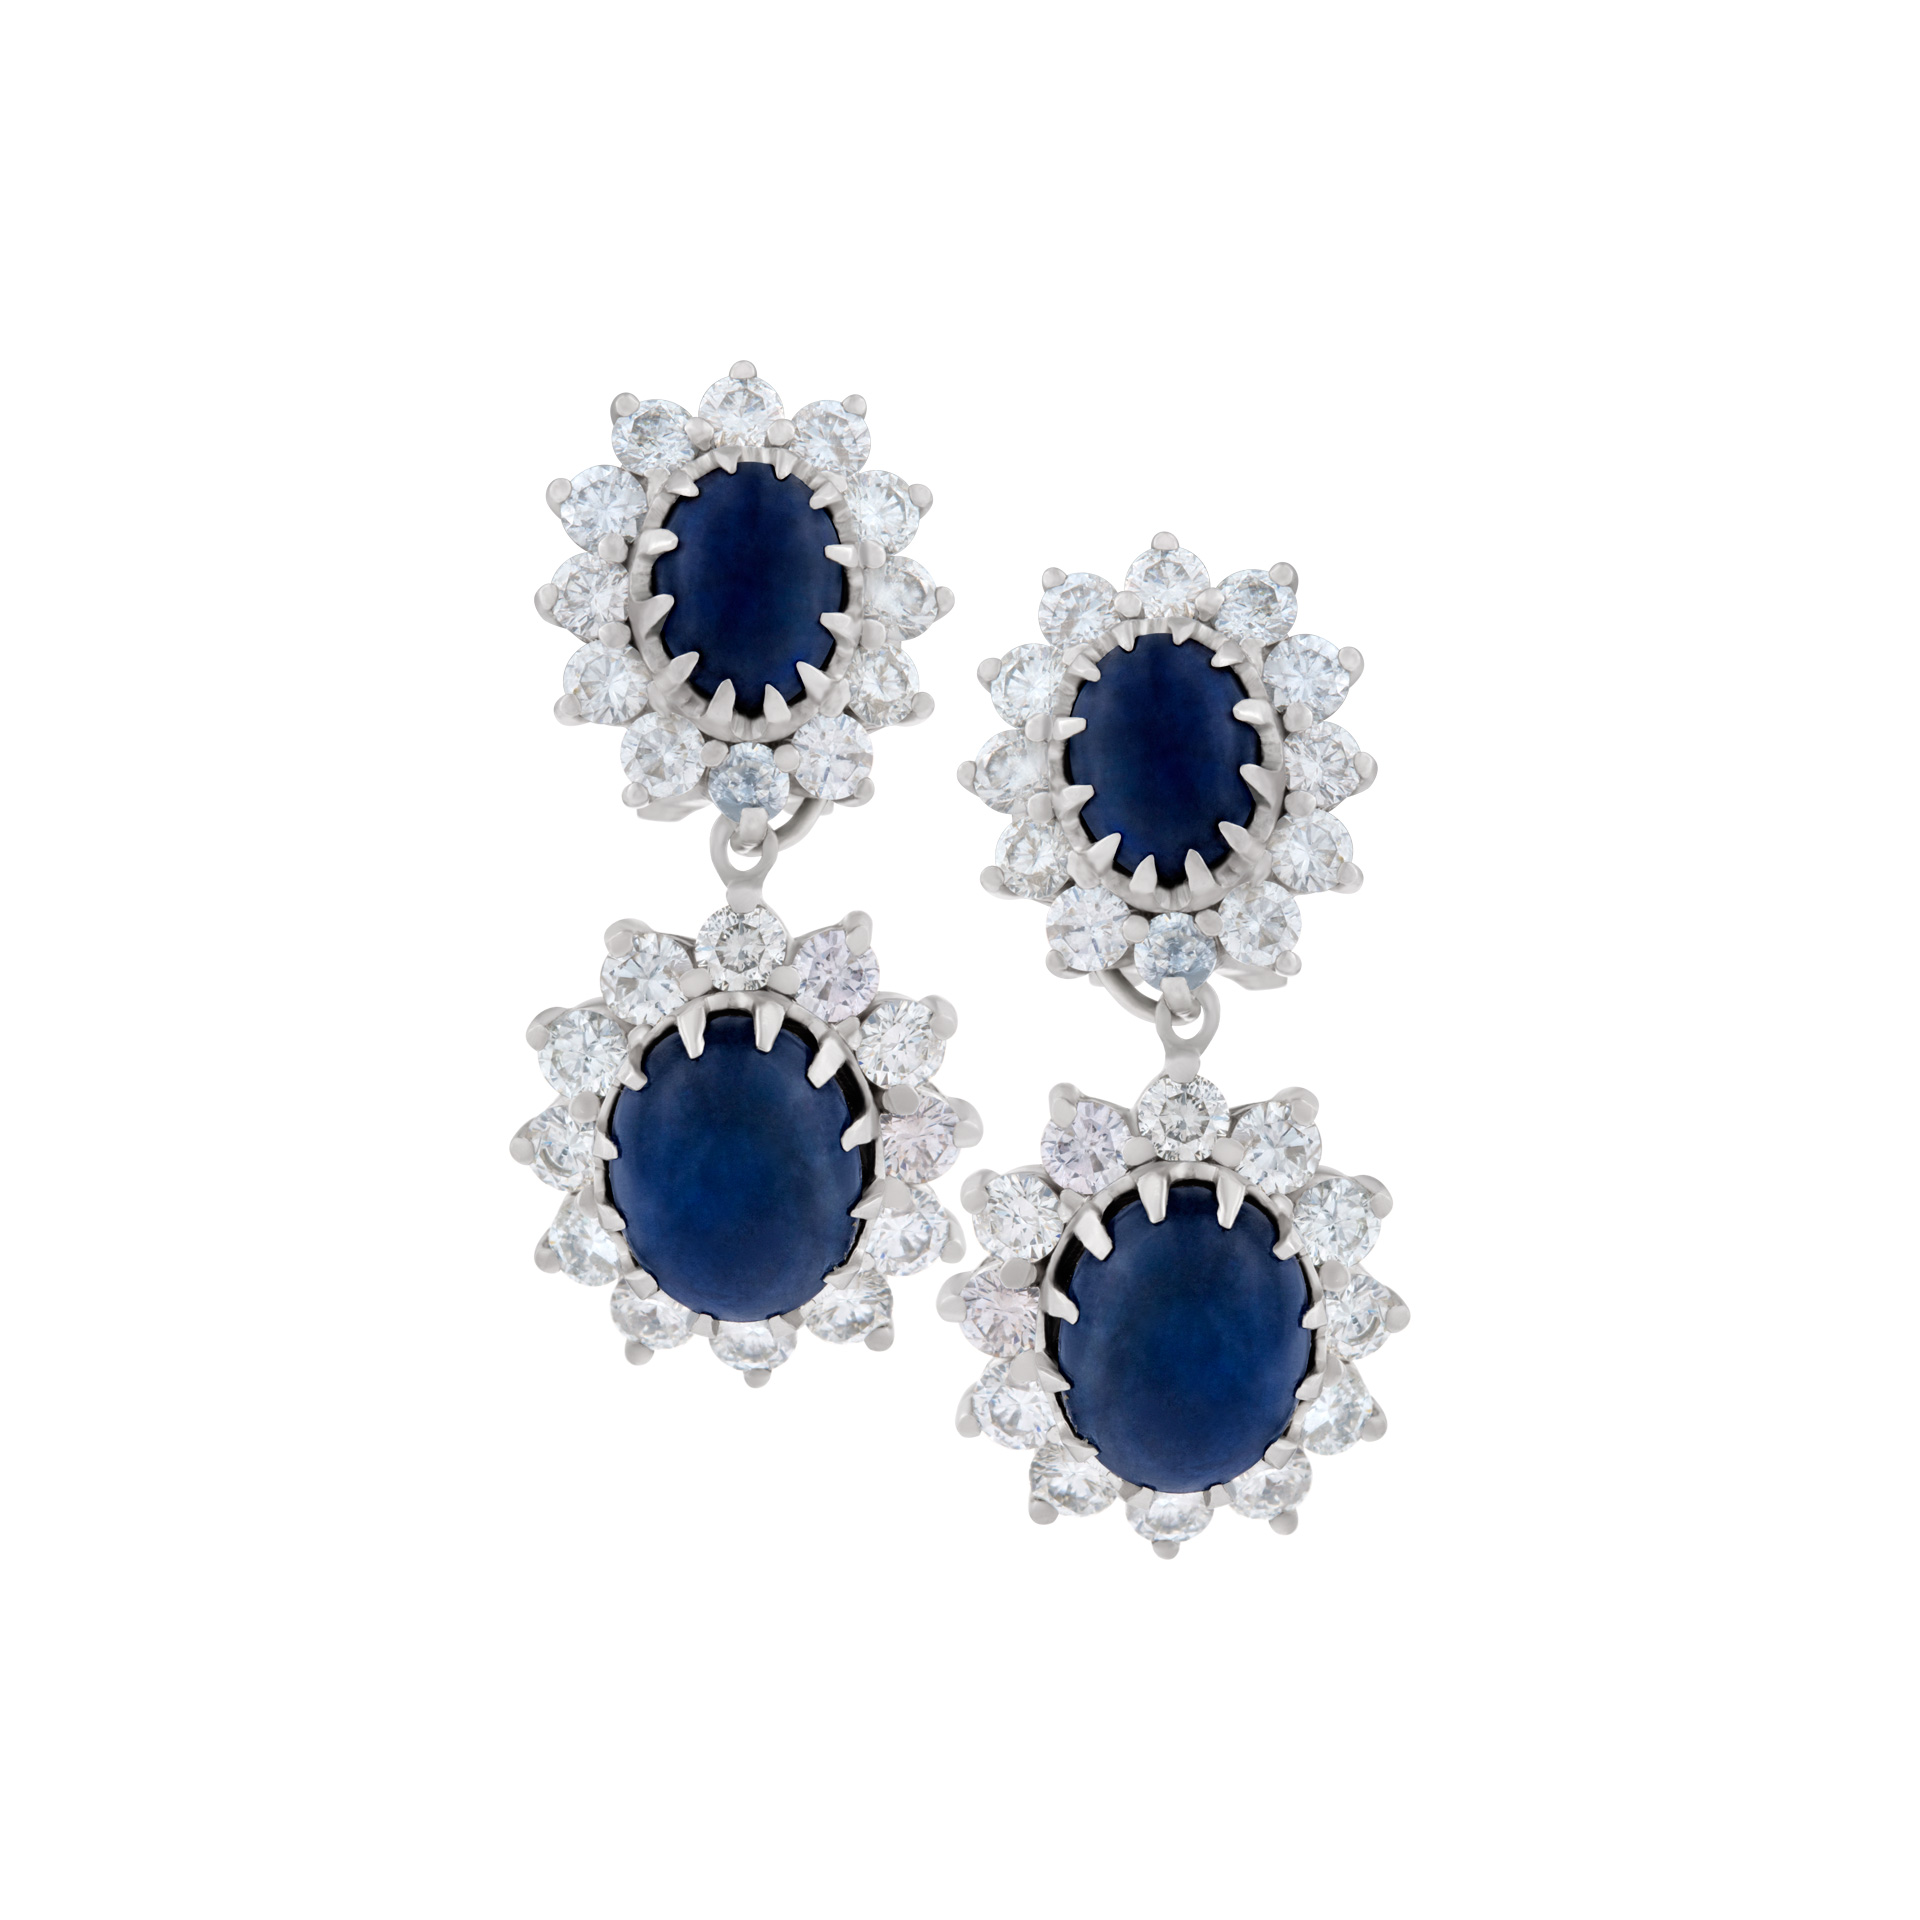 Diamond and Cabochon Sapphire earrings in 18k white gold